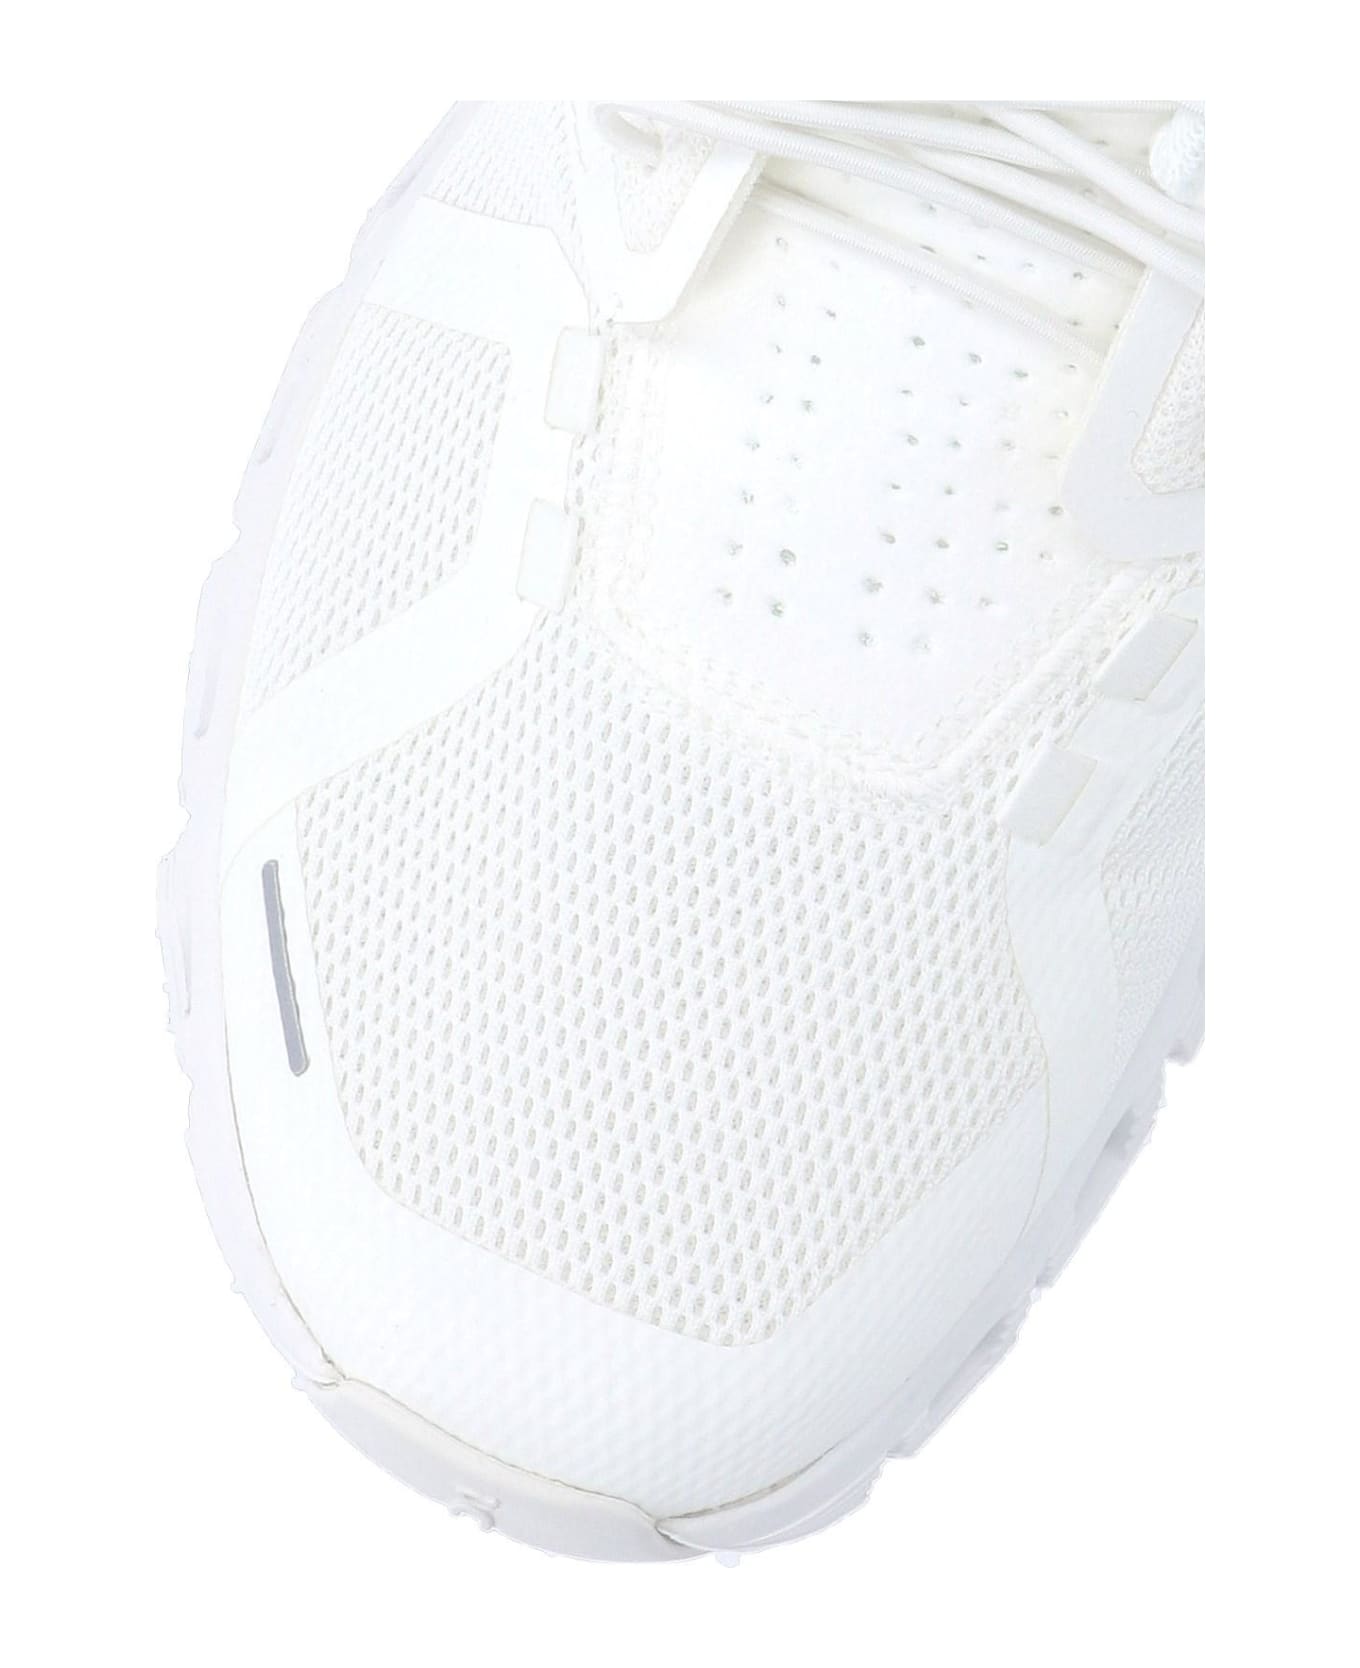 ON 'cloud 5' Sneakers - Undyed White  White